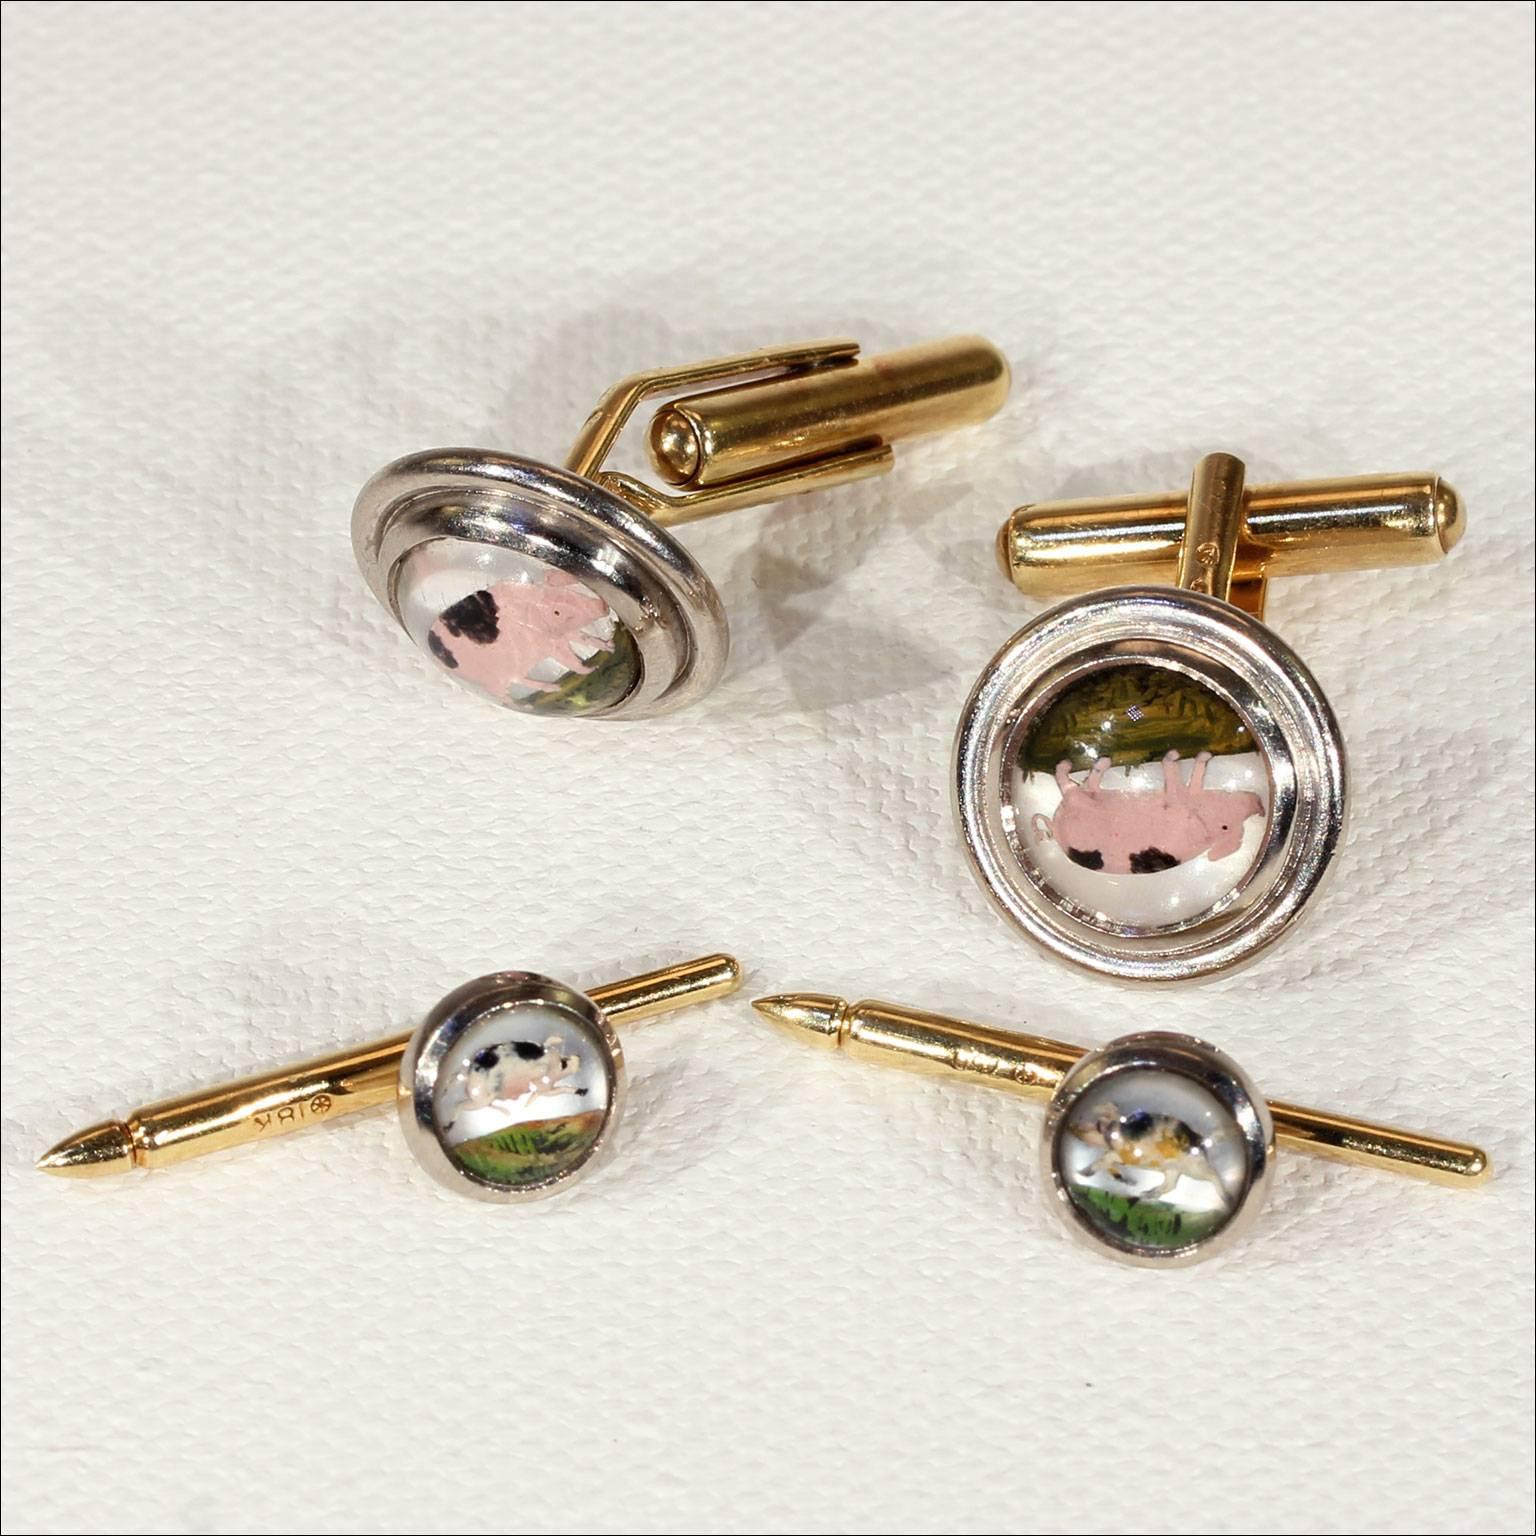 This stunning English Theo Fennell cuff link and stud set was made in 1994. These links and studs are done using a old technique called Essex crystals, wherein a cabochon cut crystal has been reversed carved and painted to give the look of a